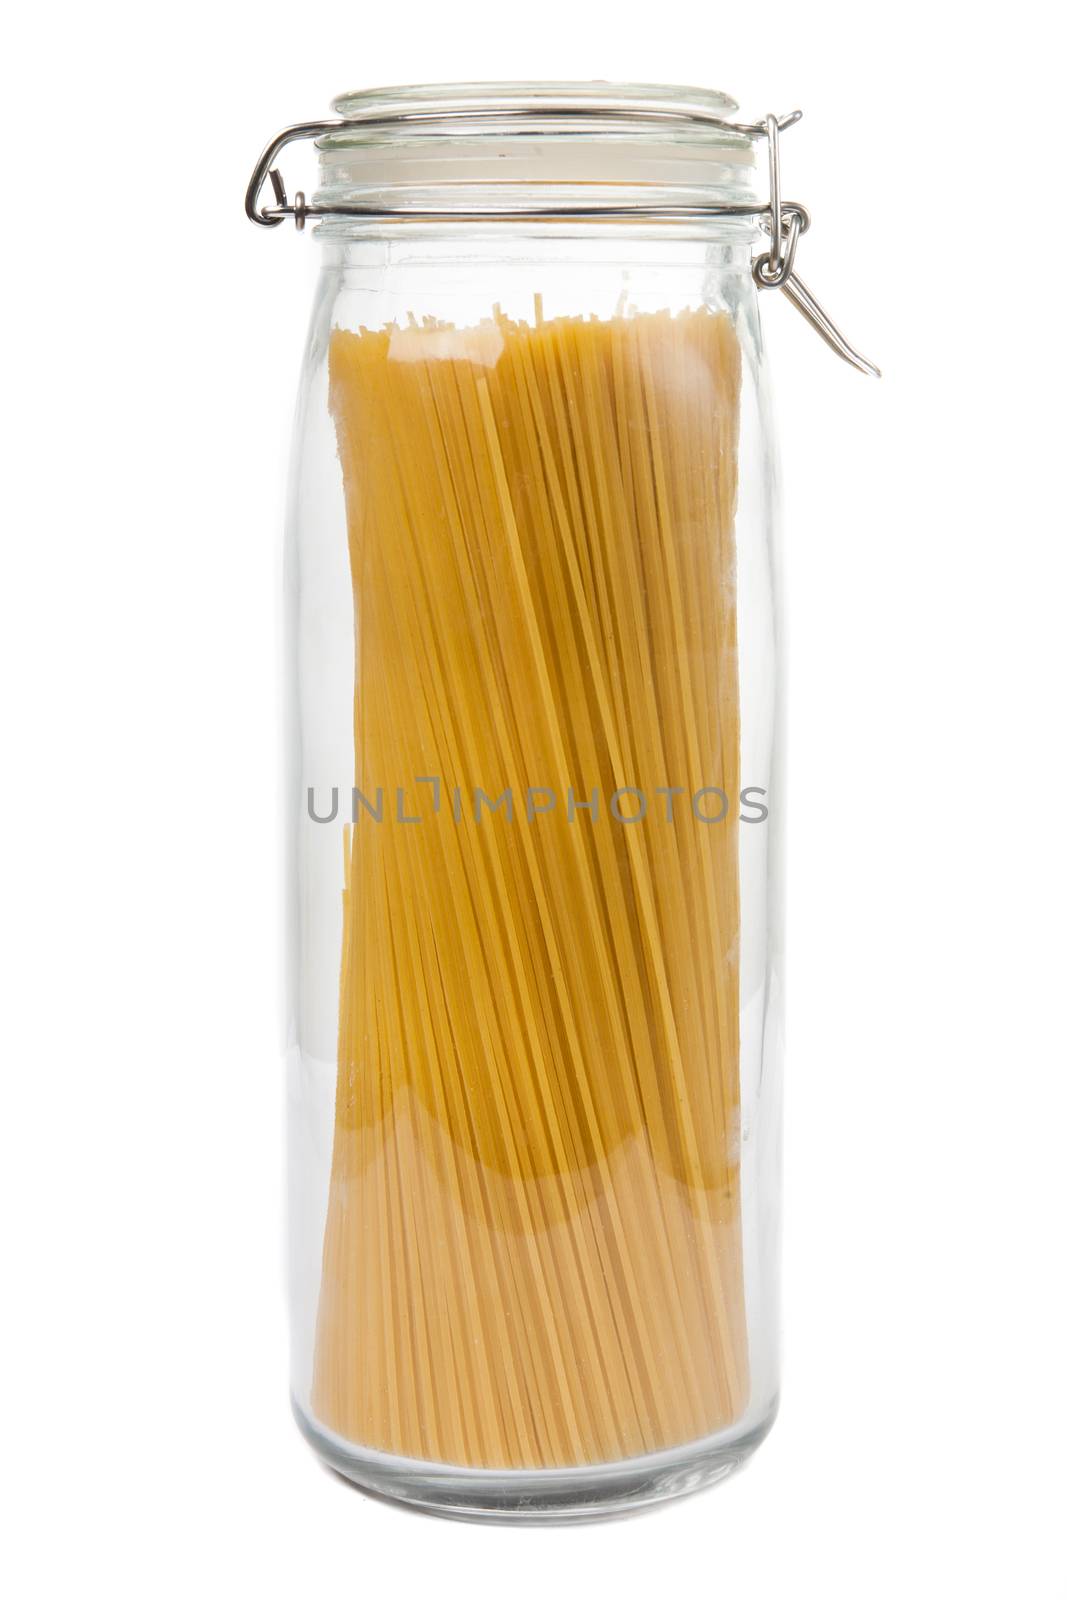 Pasta in a jar. Isolated on white background.